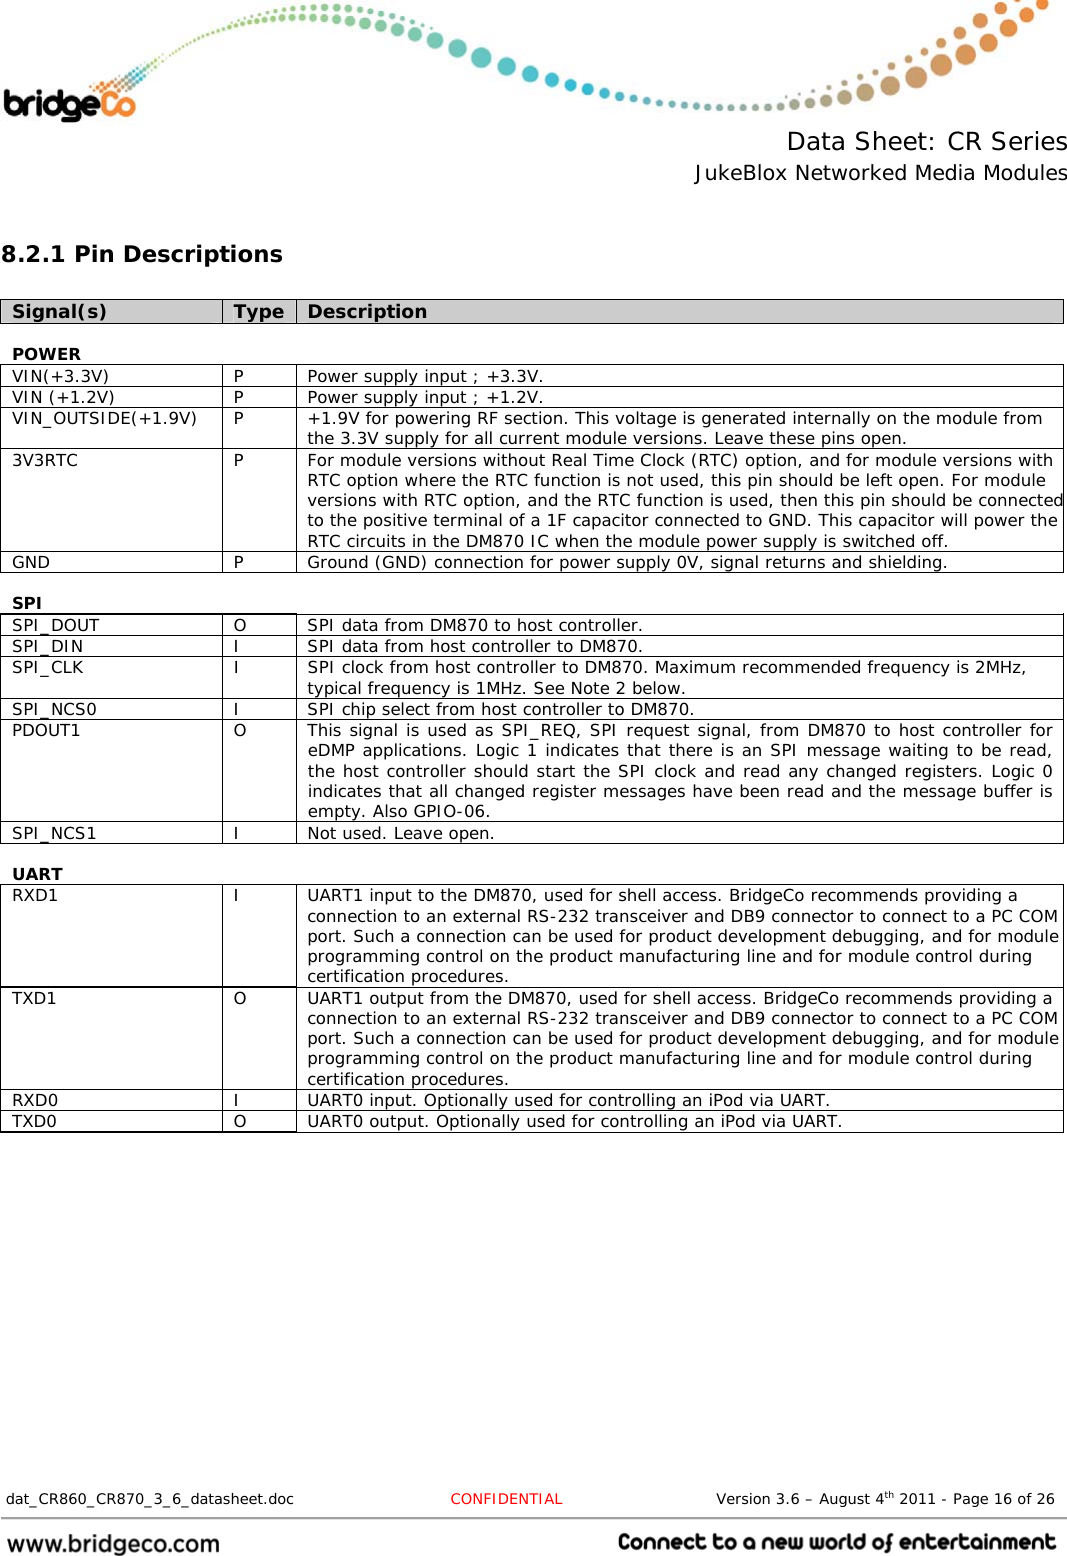  Data Sheet: CR Series JukeBlox Networked Media Modules  dat_CR860_CR870_3_6_datasheet.doc  CONFIDENTIAL                              Version 3.6 – August 4th 2011 - Page 16 of 26                                  8.2.1 Pin Descriptions  Signal(s)  Type  Description  POWER    VIN(+3.3V)  P  Power supply input ; +3.3V. VIN (+1.2V)  P  Power supply input ; +1.2V. VIN_OUTSIDE(+1.9V) P  +1.9V for powering RF section. This voltage is generated internally on the module from the 3.3V supply for all current module versions. Leave these pins open. 3V3RTC  P  For module versions without Real Time Clock (RTC) option, and for module versions with RTC option where the RTC function is not used, this pin should be left open. For module versions with RTC option, and the RTC function is used, then this pin should be connectedto the positive terminal of a 1F capacitor connected to GND. This capacitor will power the RTC circuits in the DM870 IC when the module power supply is switched off. GND P Ground (GND) connection for power supply 0V, signal returns and shielding.  SPI    SPI_DOUT  O  SPI data from DM870 to host controller. SPI_DIN  I  SPI data from host controller to DM870. SPI_CLK  I  SPI clock from host controller to DM870. Maximum recommended frequency is 2MHz, typical frequency is 1MHz. See Note 2 below. SPI_NCS0  I  SPI chip select from host controller to DM870. PDOUT1  O  This signal is used as SPI_REQ, SPI request signal, from DM870 to host controller for eDMP applications. Logic 1 indicates that there is an SPI message waiting to be read, the host controller should start the SPI clock and read any changed registers. Logic 0 indicates that all changed register messages have been read and the message buffer is empty. Also GPIO-06. SPI_NCS1  I  Not used. Leave open.  UART    RXD1  I  UART1 input to the DM870, used for shell access. BridgeCo recommends providing a connection to an external RS-232 transceiver and DB9 connector to connect to a PC COM port. Such a connection can be used for product development debugging, and for module programming control on the product manufacturing line and for module control during certification procedures. TXD1  O  UART1 output from the DM870, used for shell access. BridgeCo recommends providing a connection to an external RS-232 transceiver and DB9 connector to connect to a PC COM port. Such a connection can be used for product development debugging, and for module programming control on the product manufacturing line and for module control during certification procedures. RXD0  I  UART0 input. Optionally used for controlling an iPod via UART. TXD0  O  UART0 output. Optionally used for controlling an iPod via UART. 